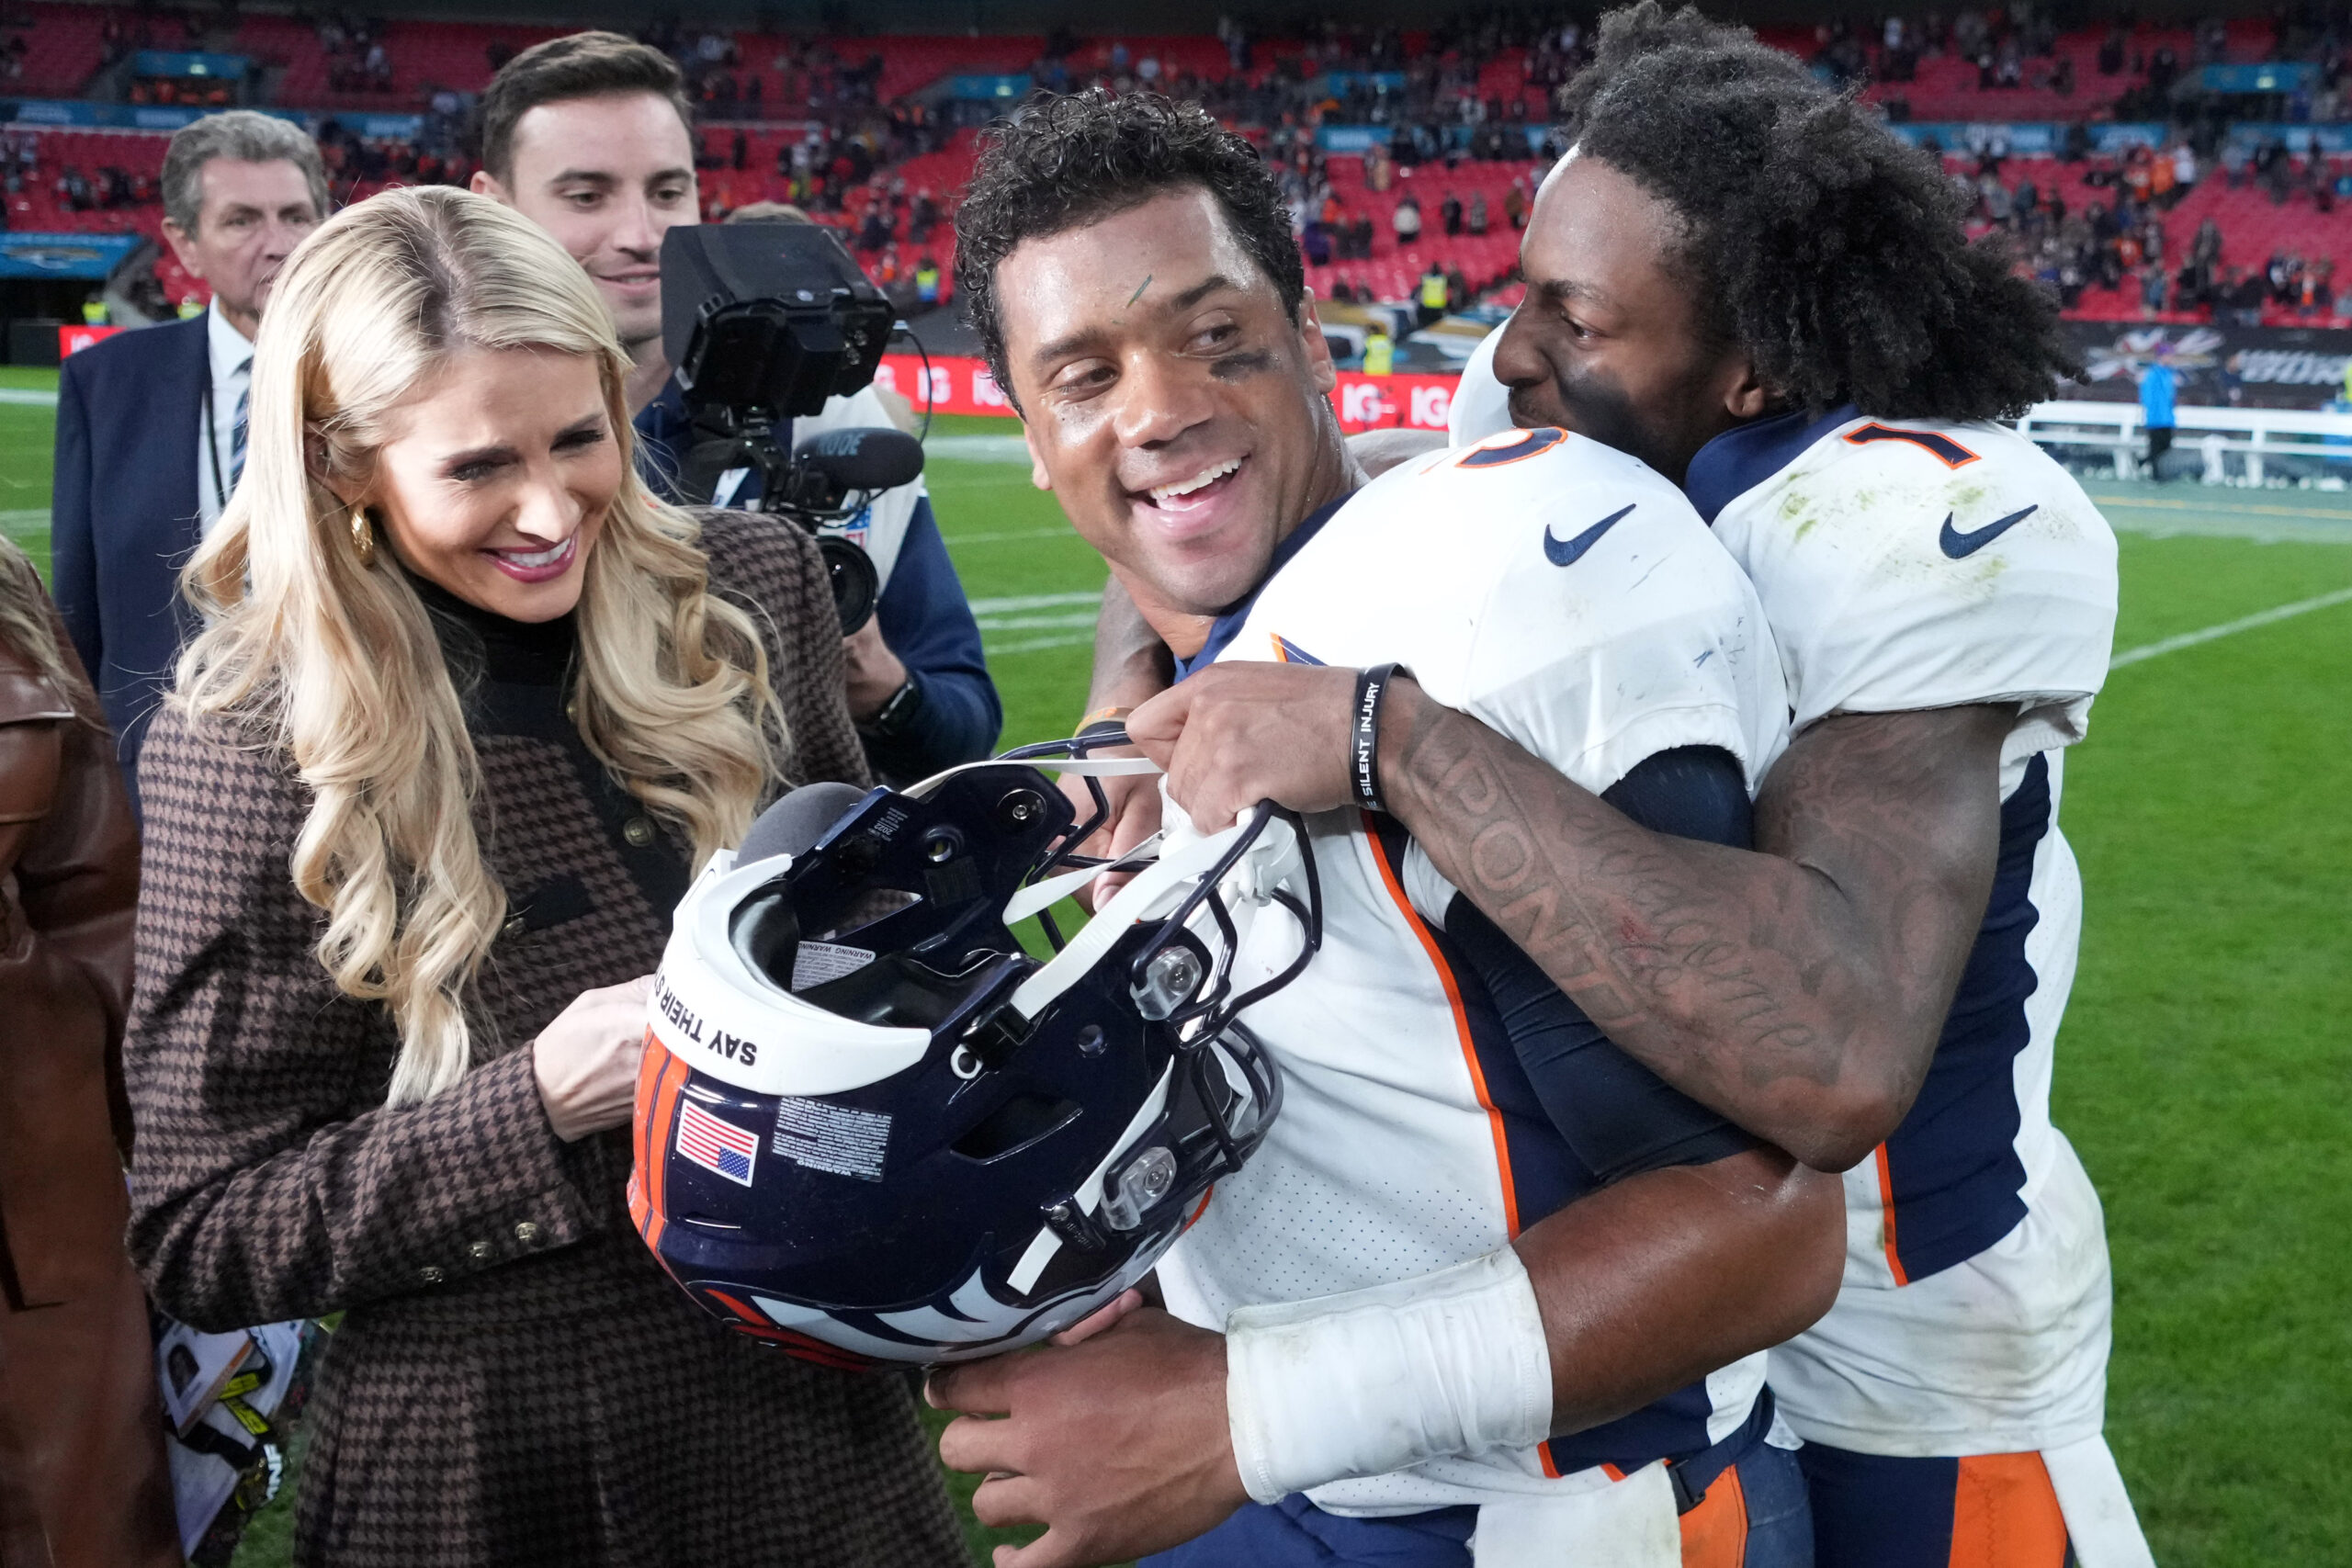 Broncos to play in London in 2022, with team's lobbying apparently